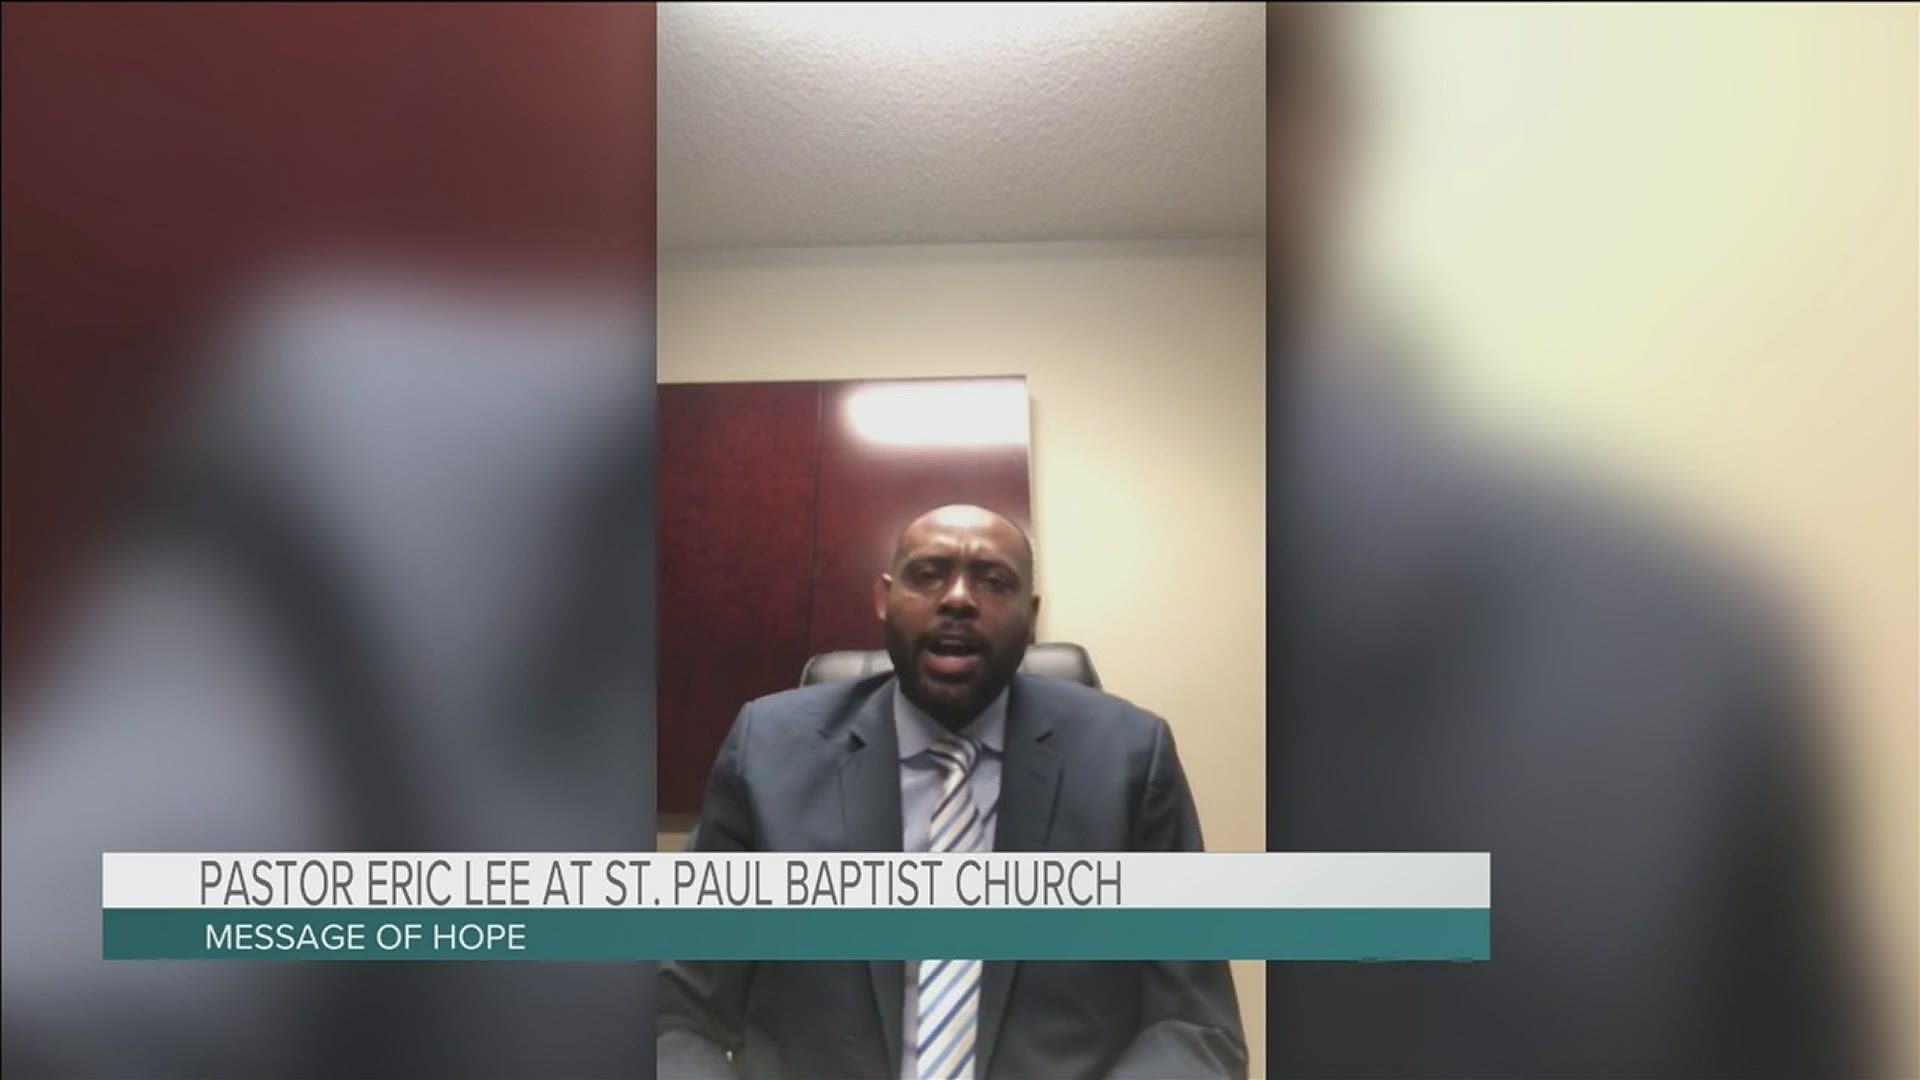 Local 24 News brings you messages of hope from the Greater Memphis faith community